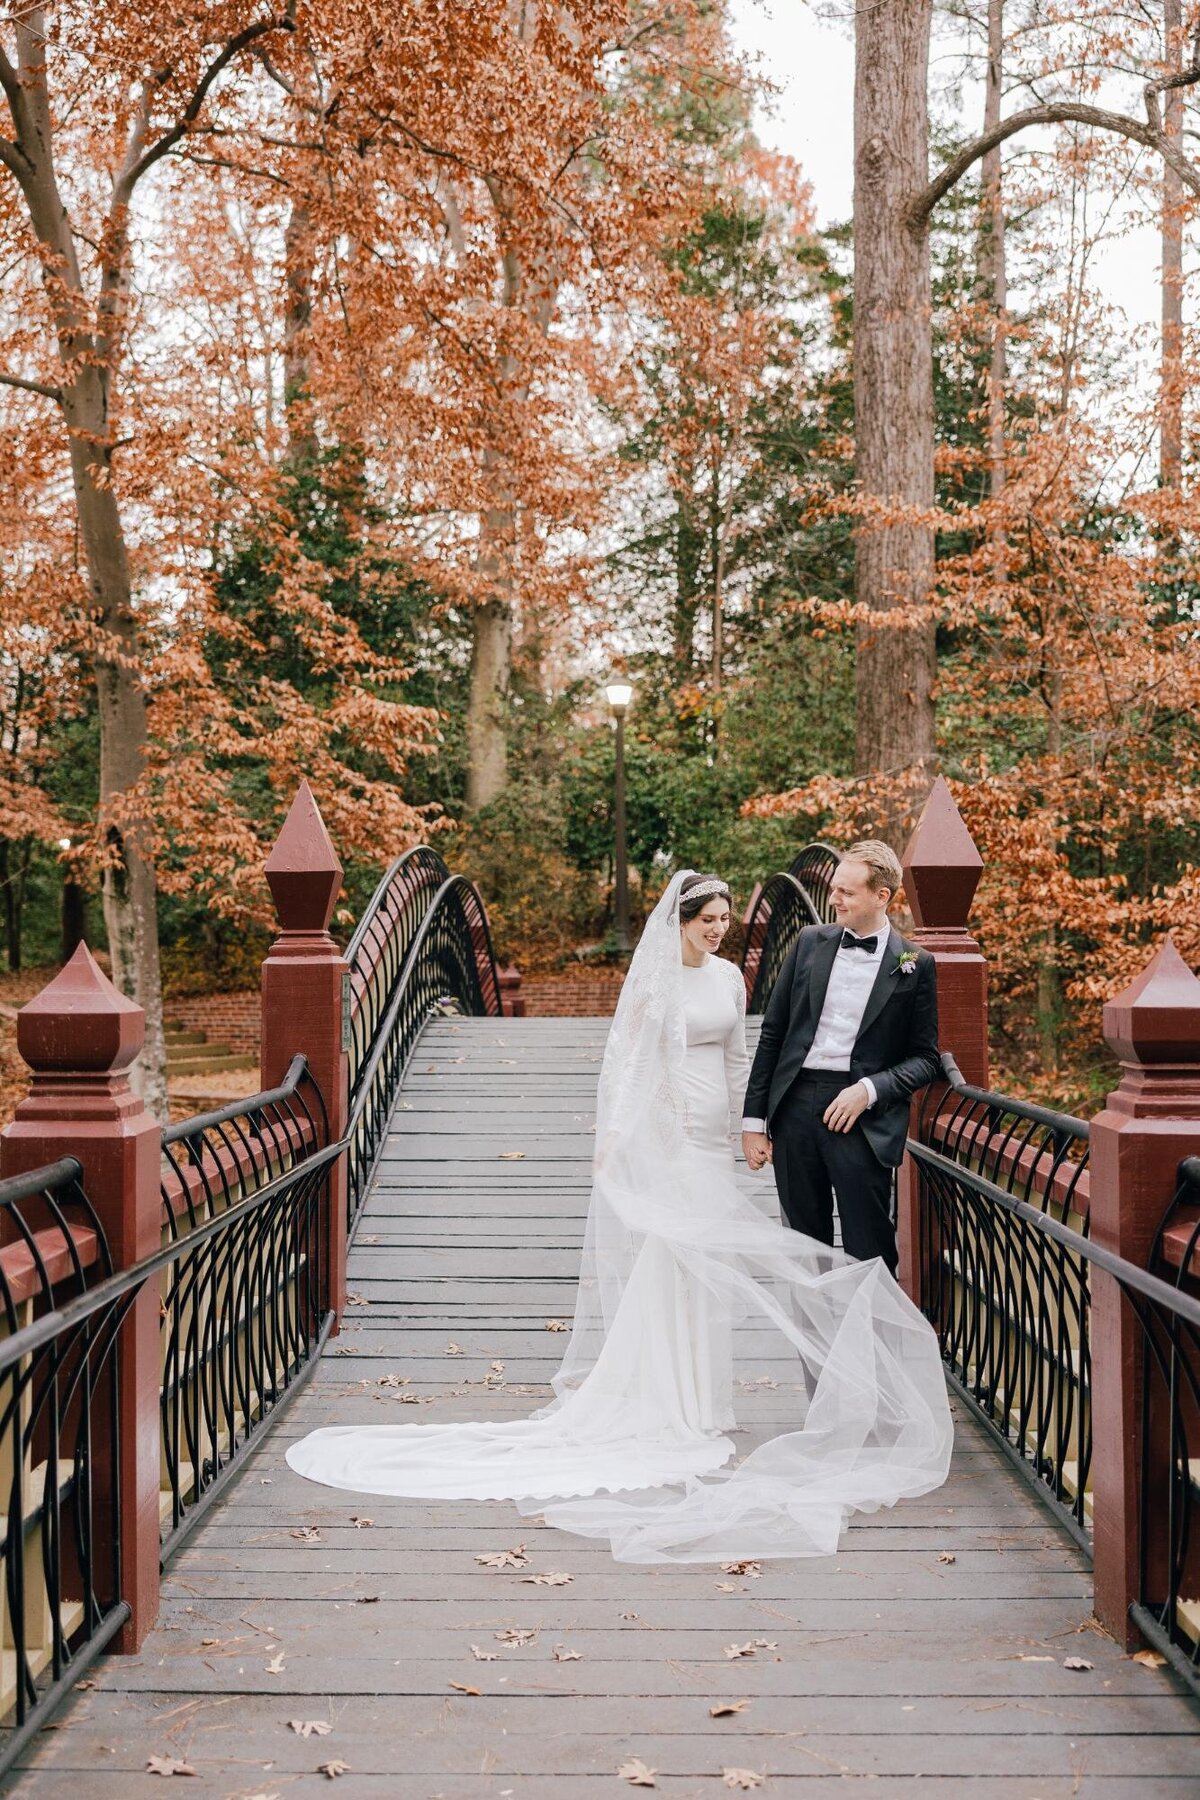 Bride and groom walking across a bridge in an autumnal setting.